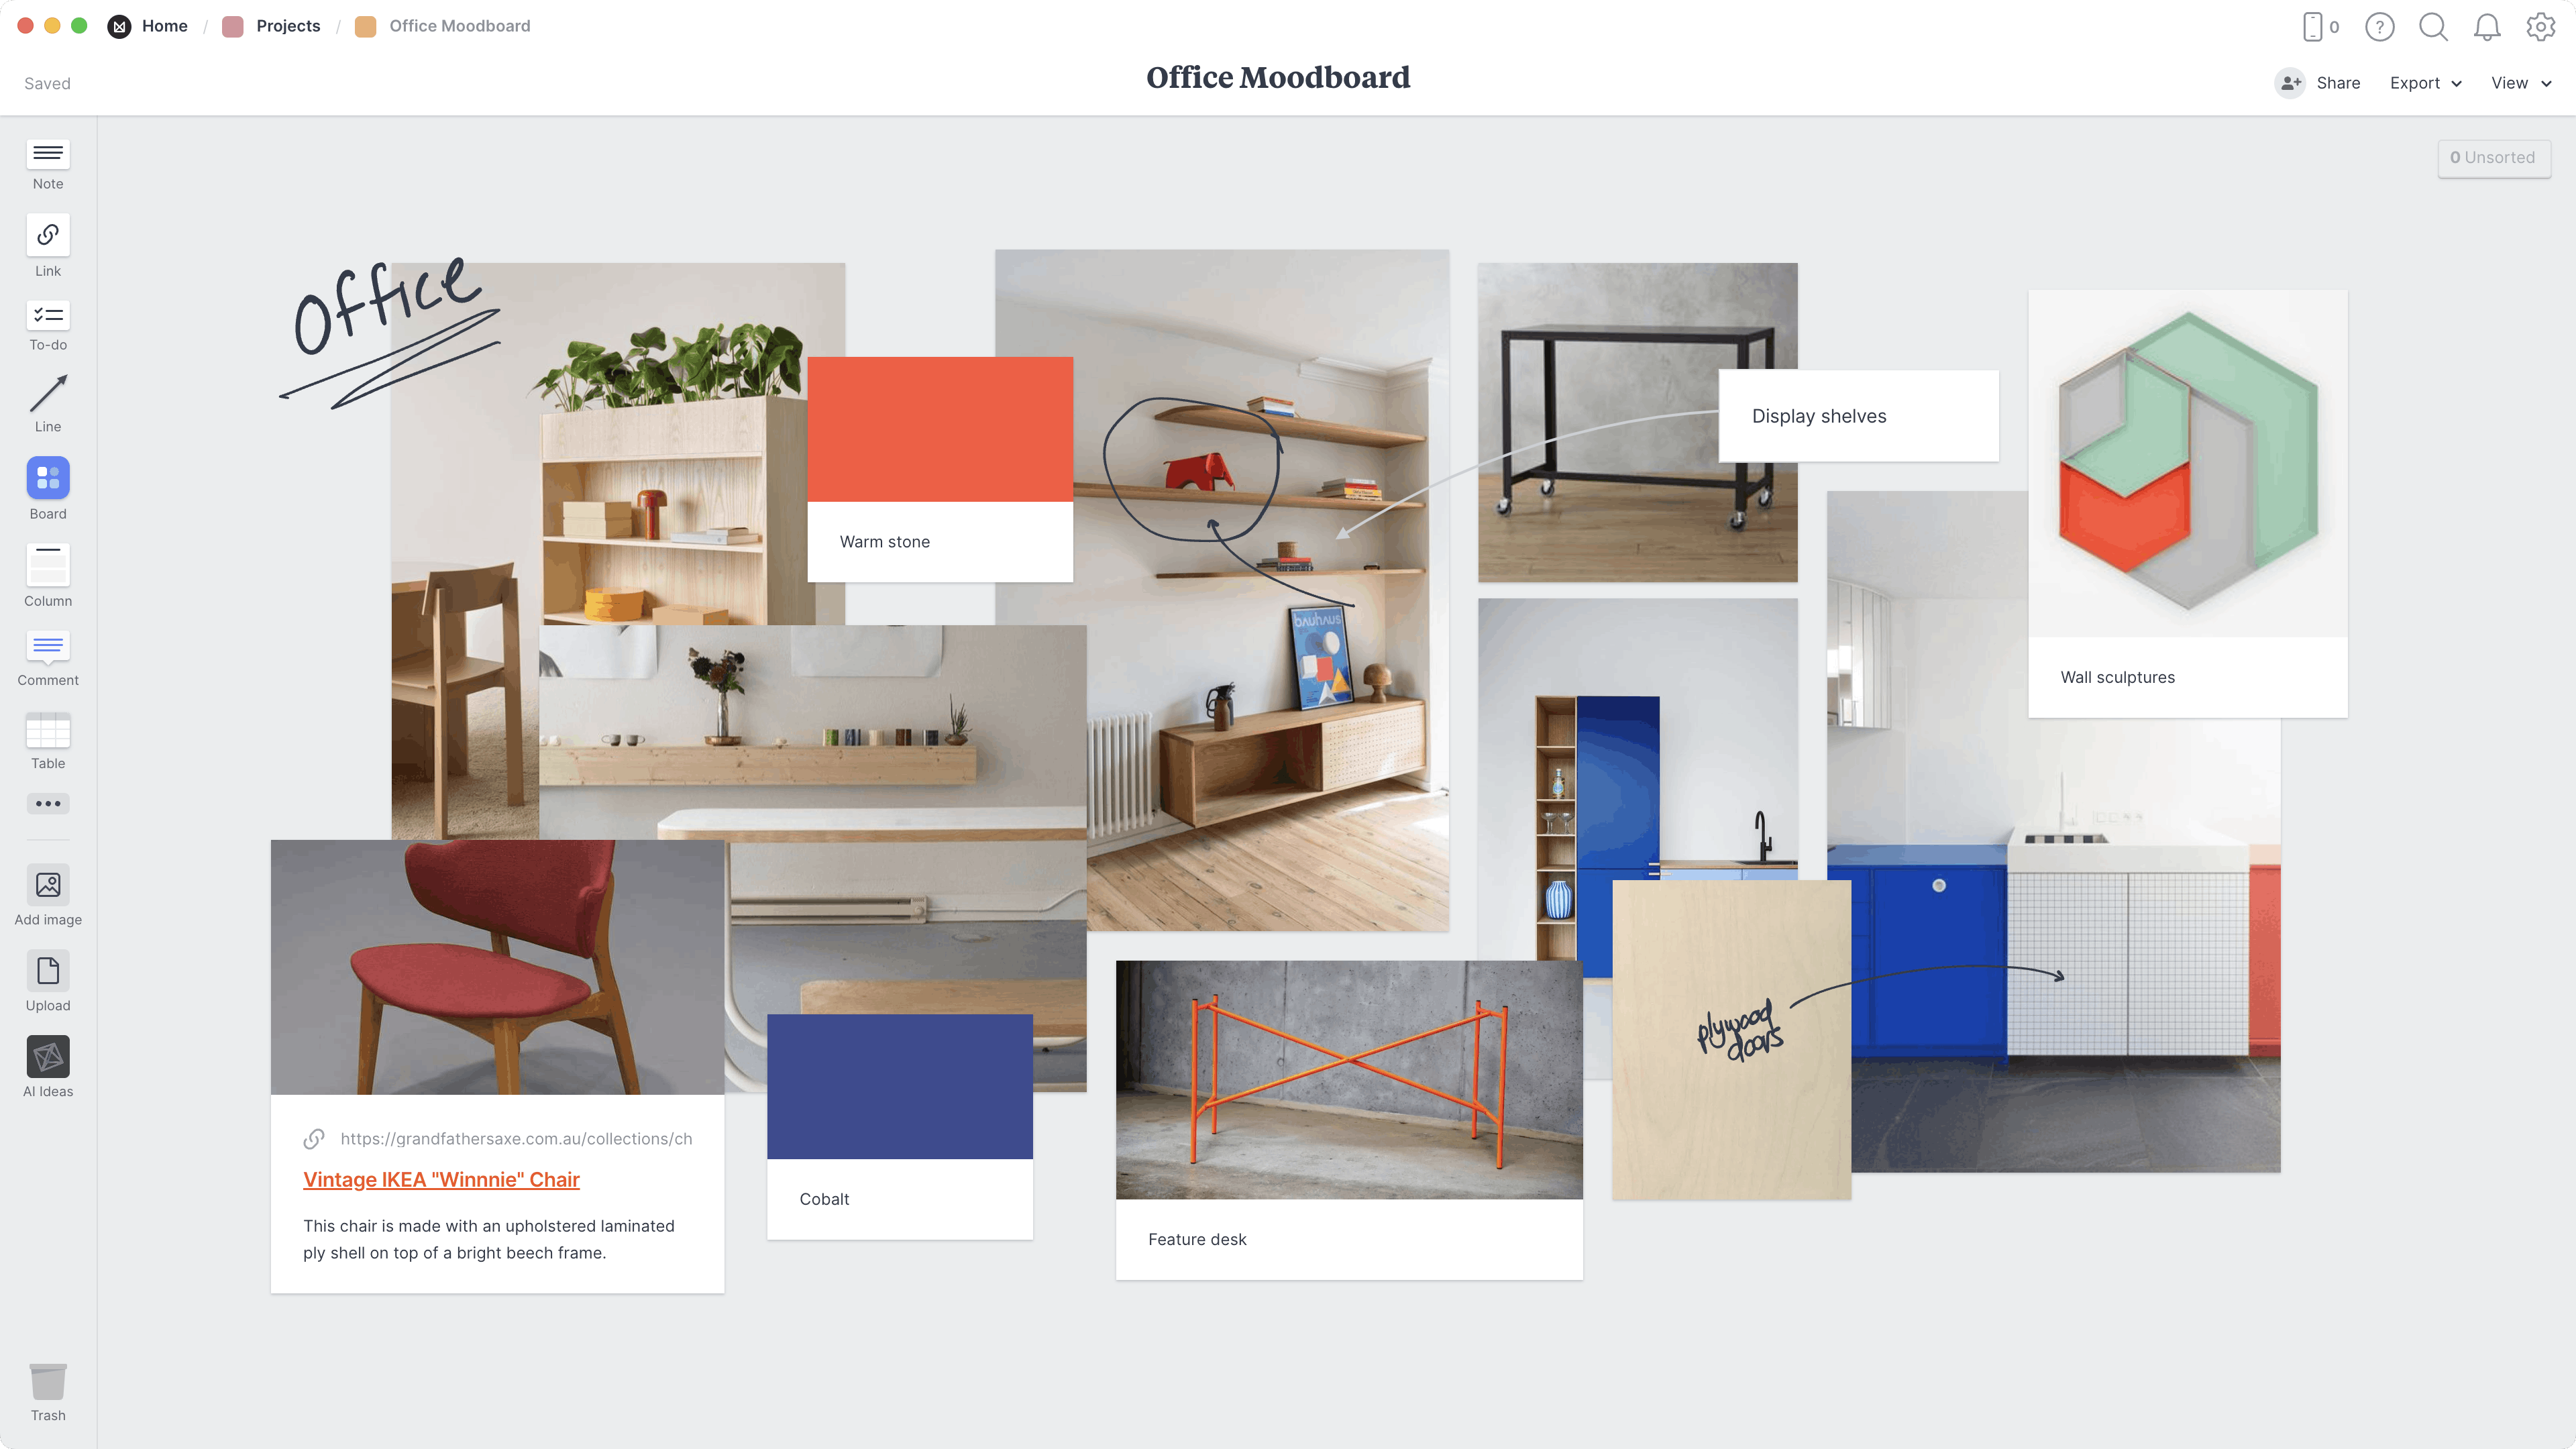 Renovation Moodboard Template, within the Milanote app